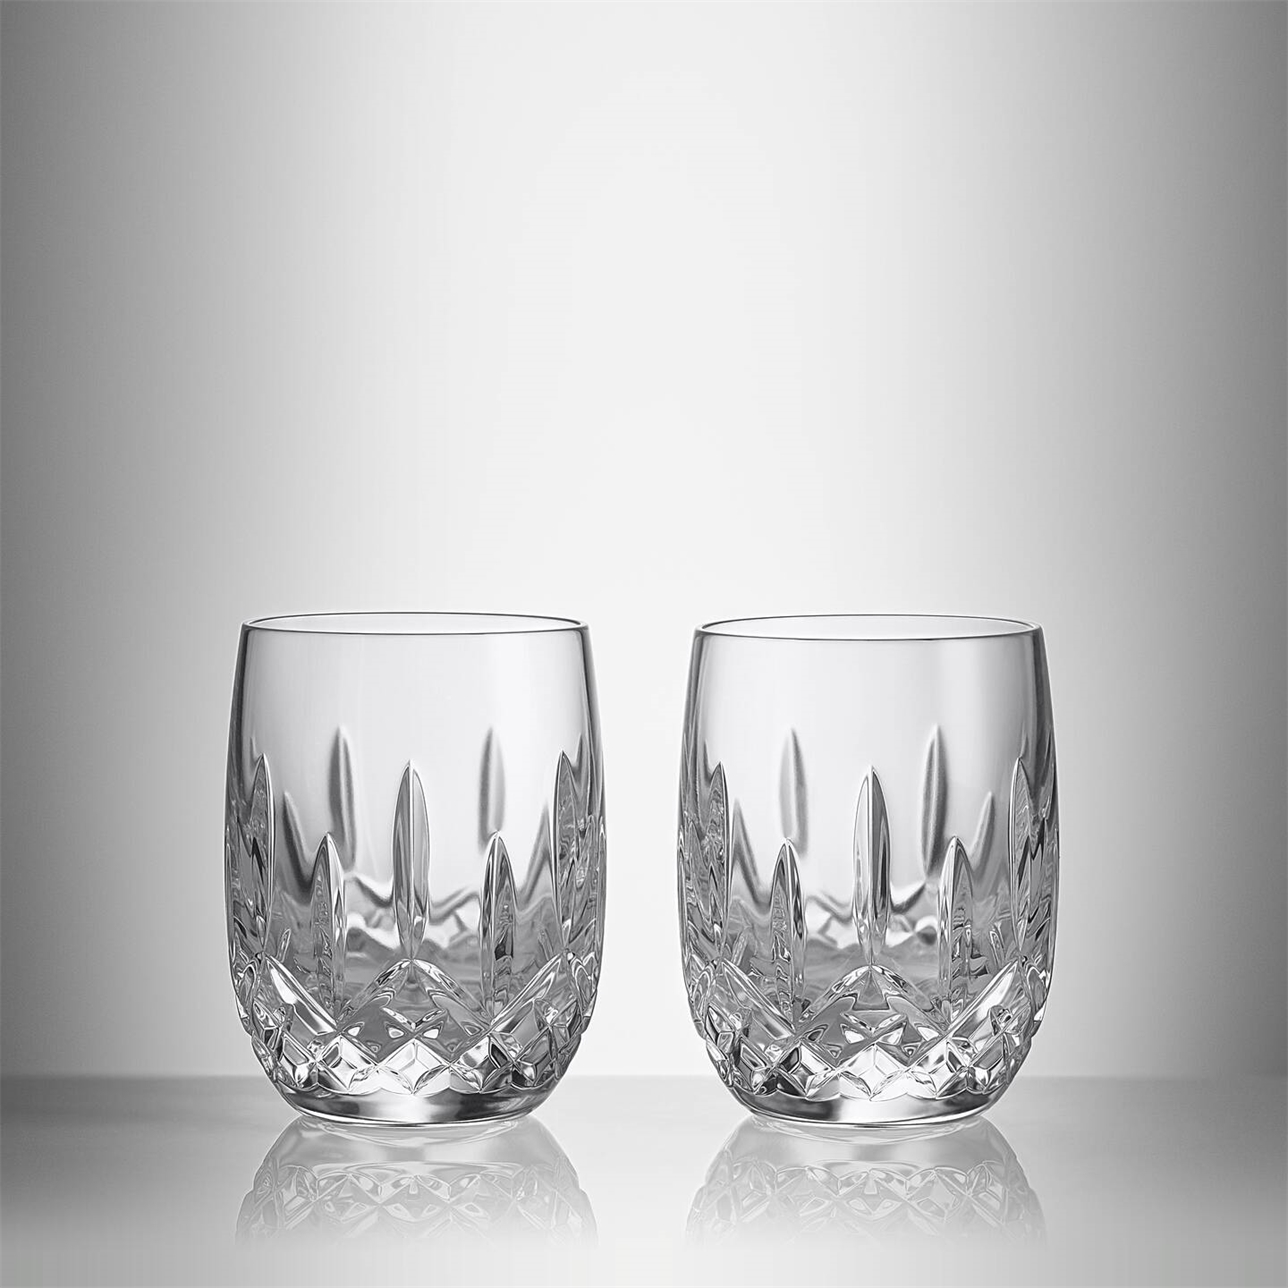 Lismore Connoisseur Rounded Tumbler, Set of 2